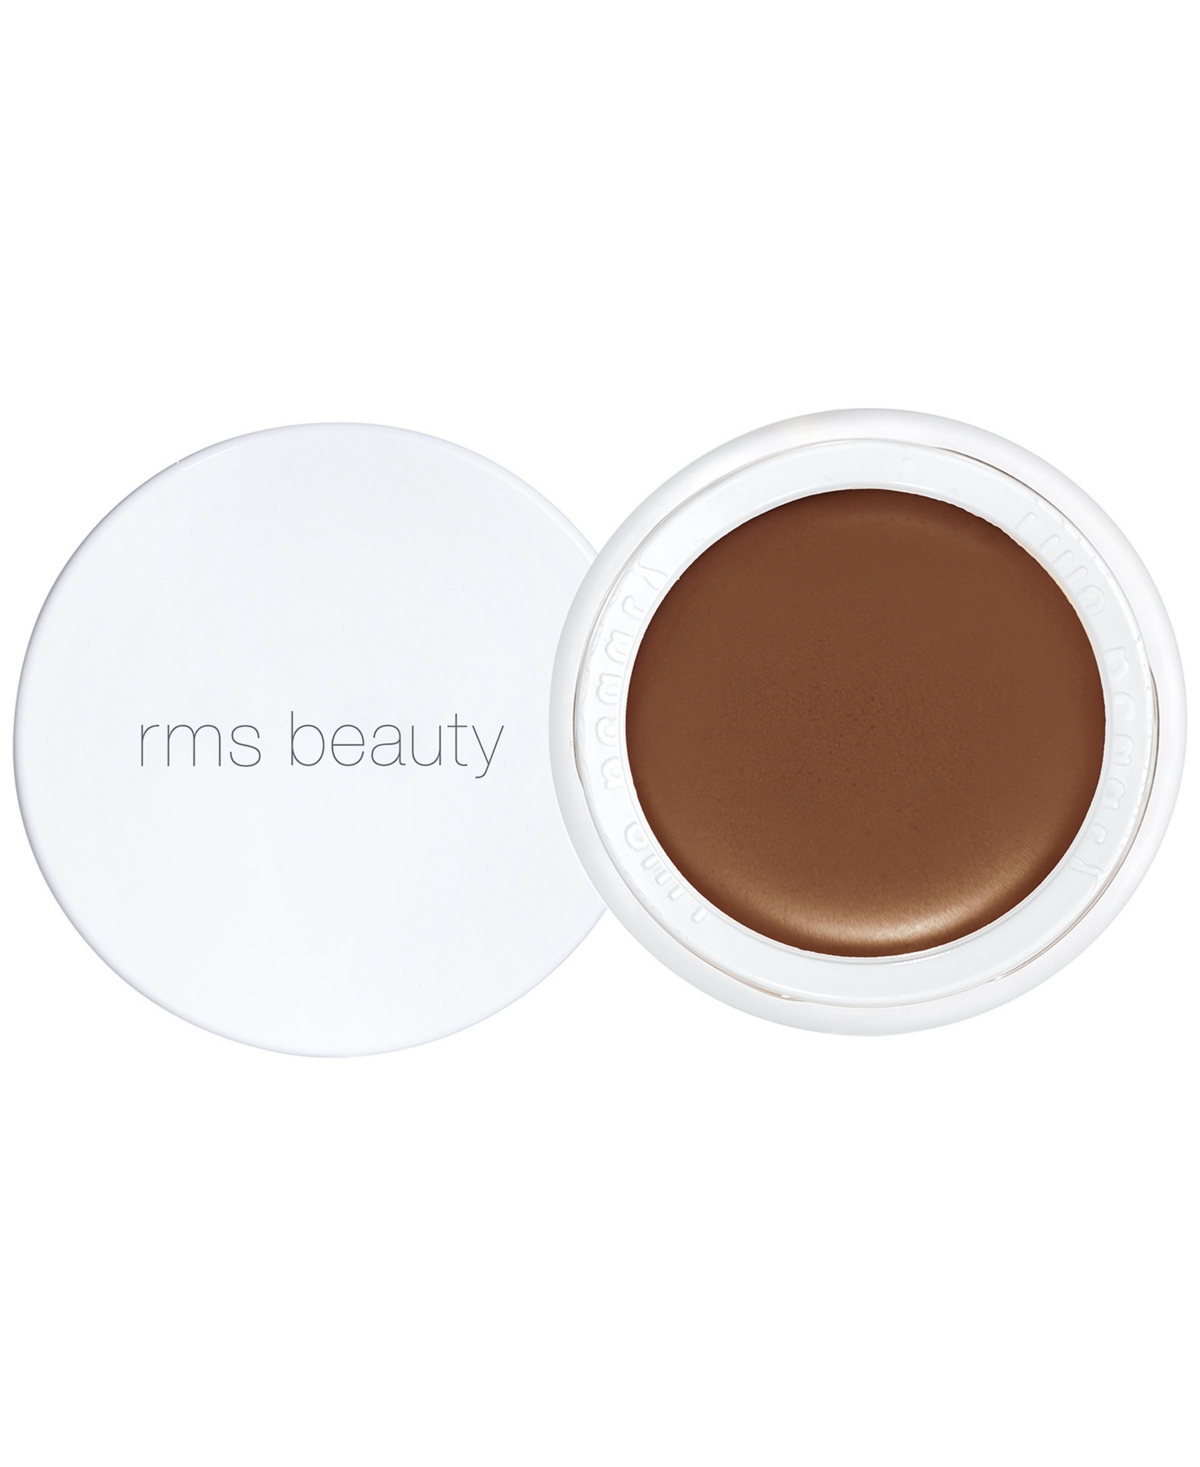 Rms Beauty Uncoverup Concealer In Deep Mahogany